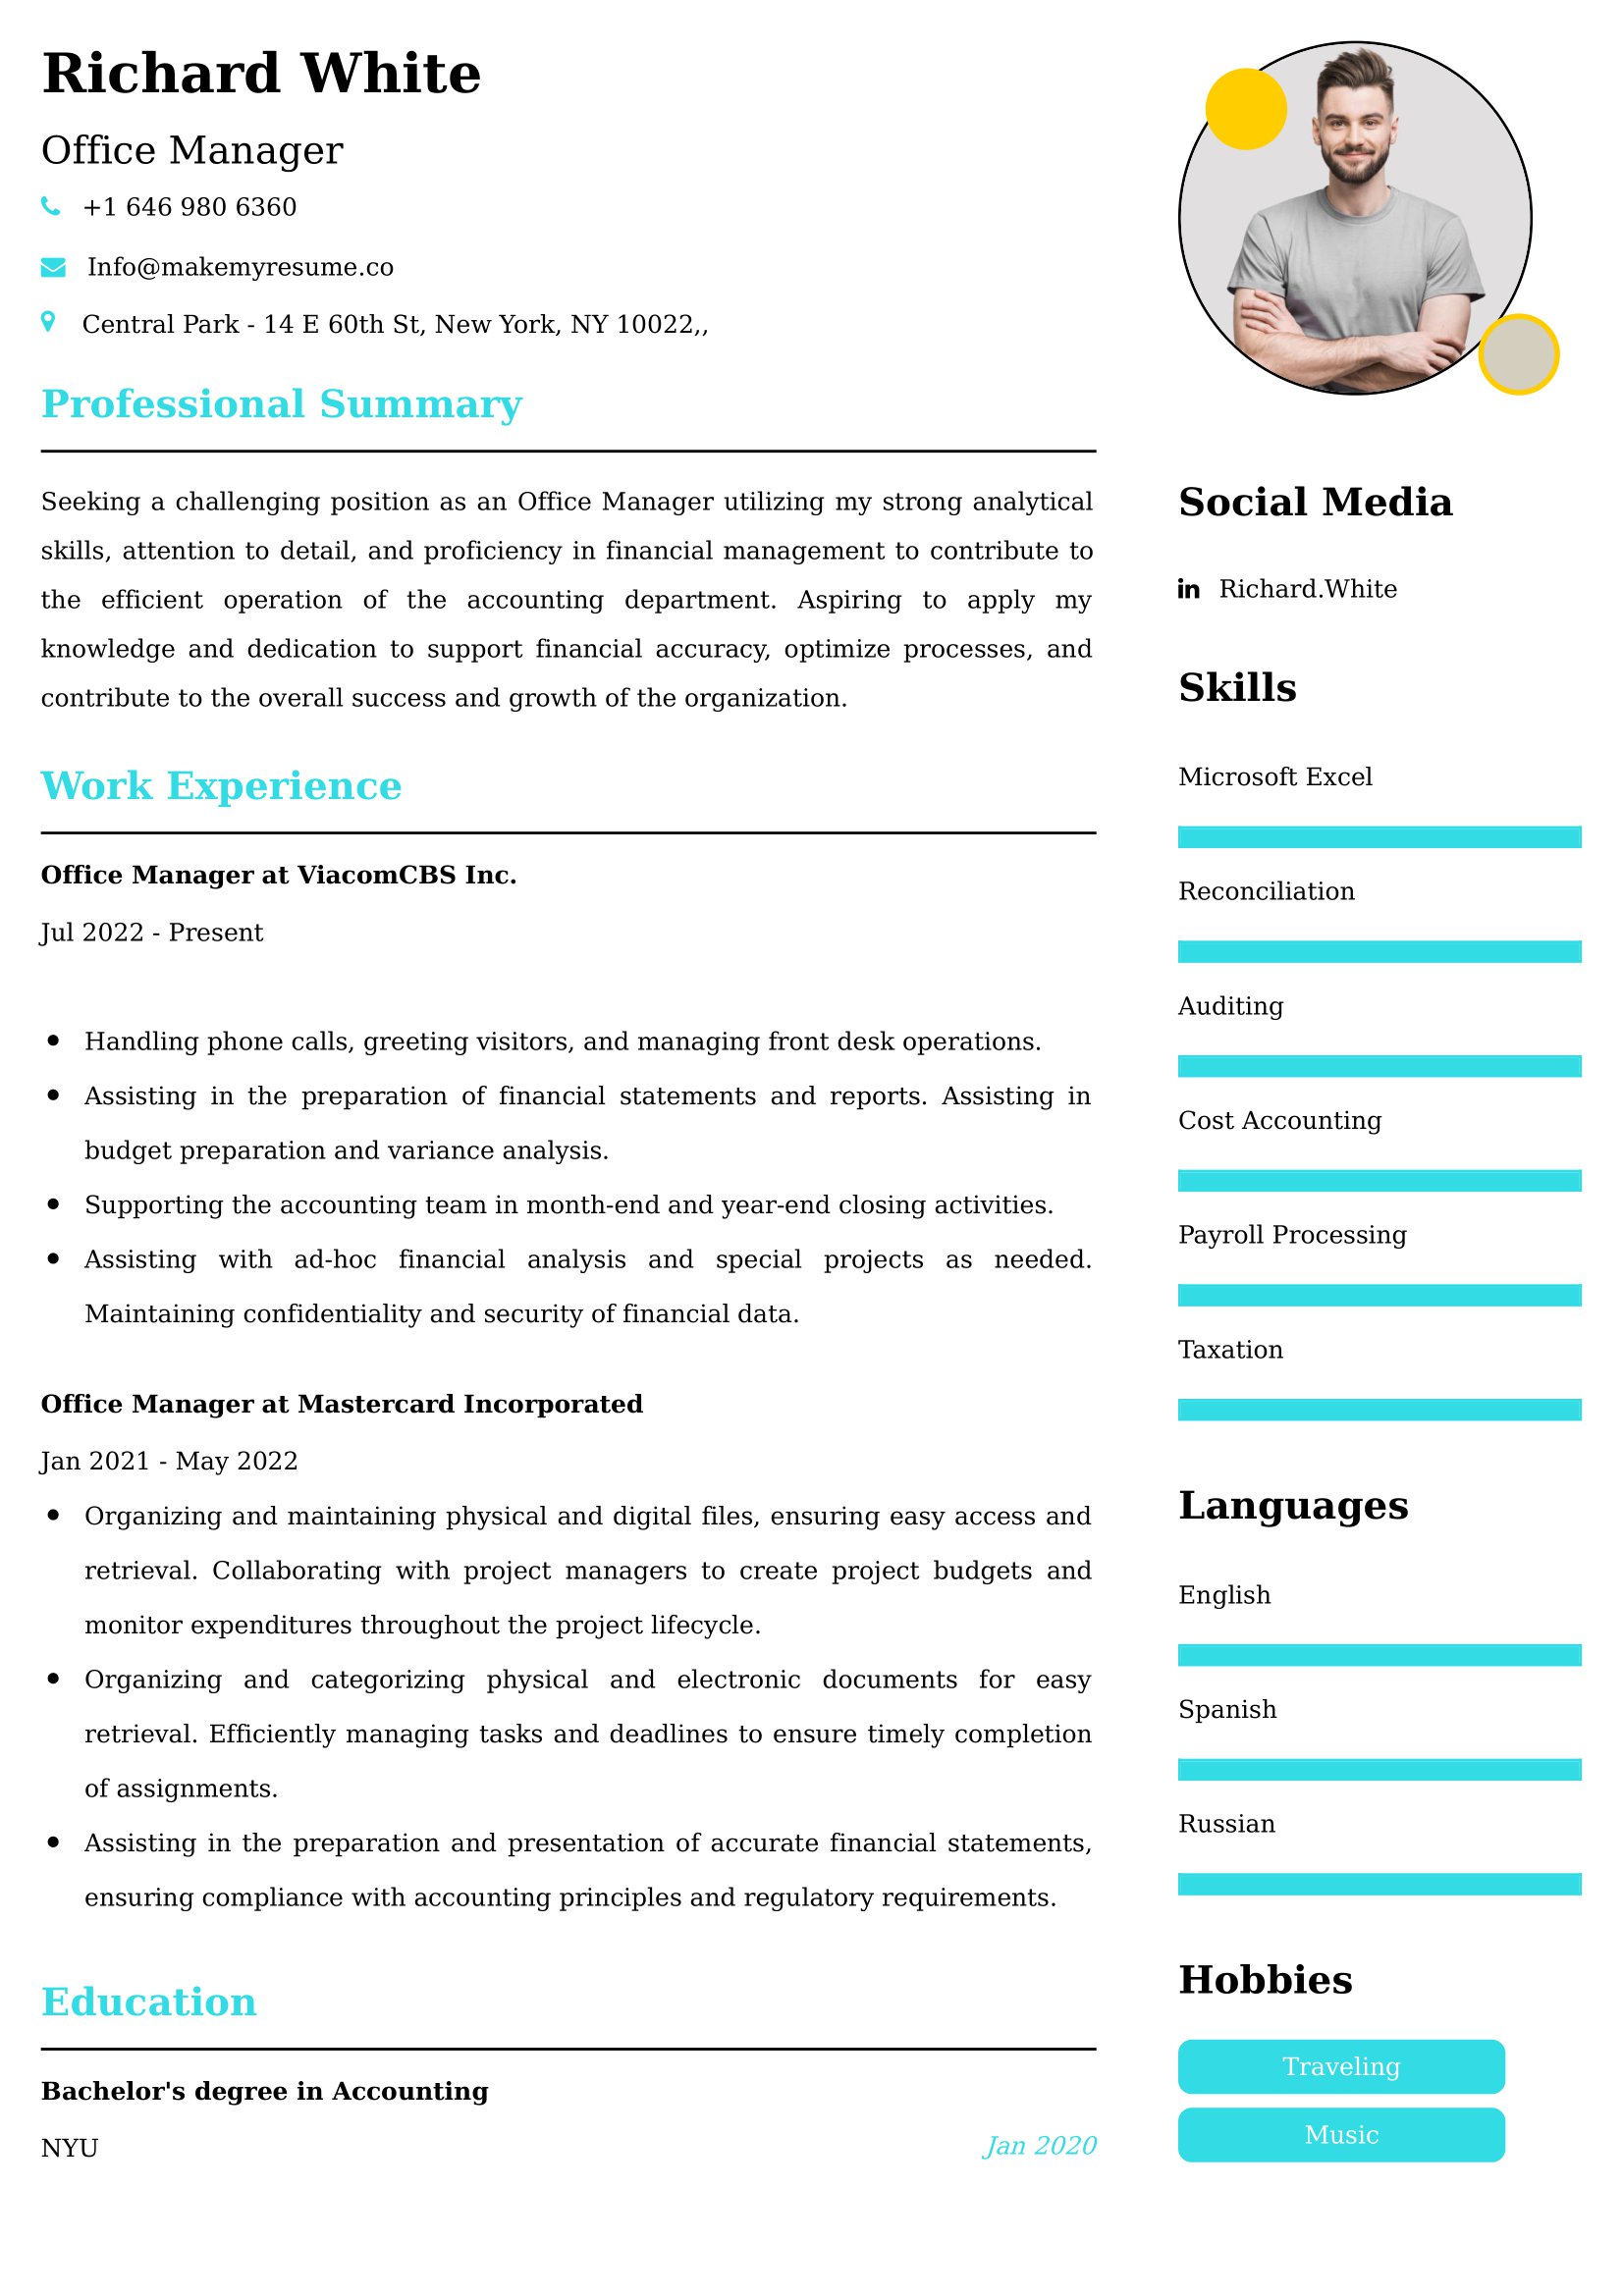 Administrative Assistant Manager Resume Examples - Canadian Format and Tips